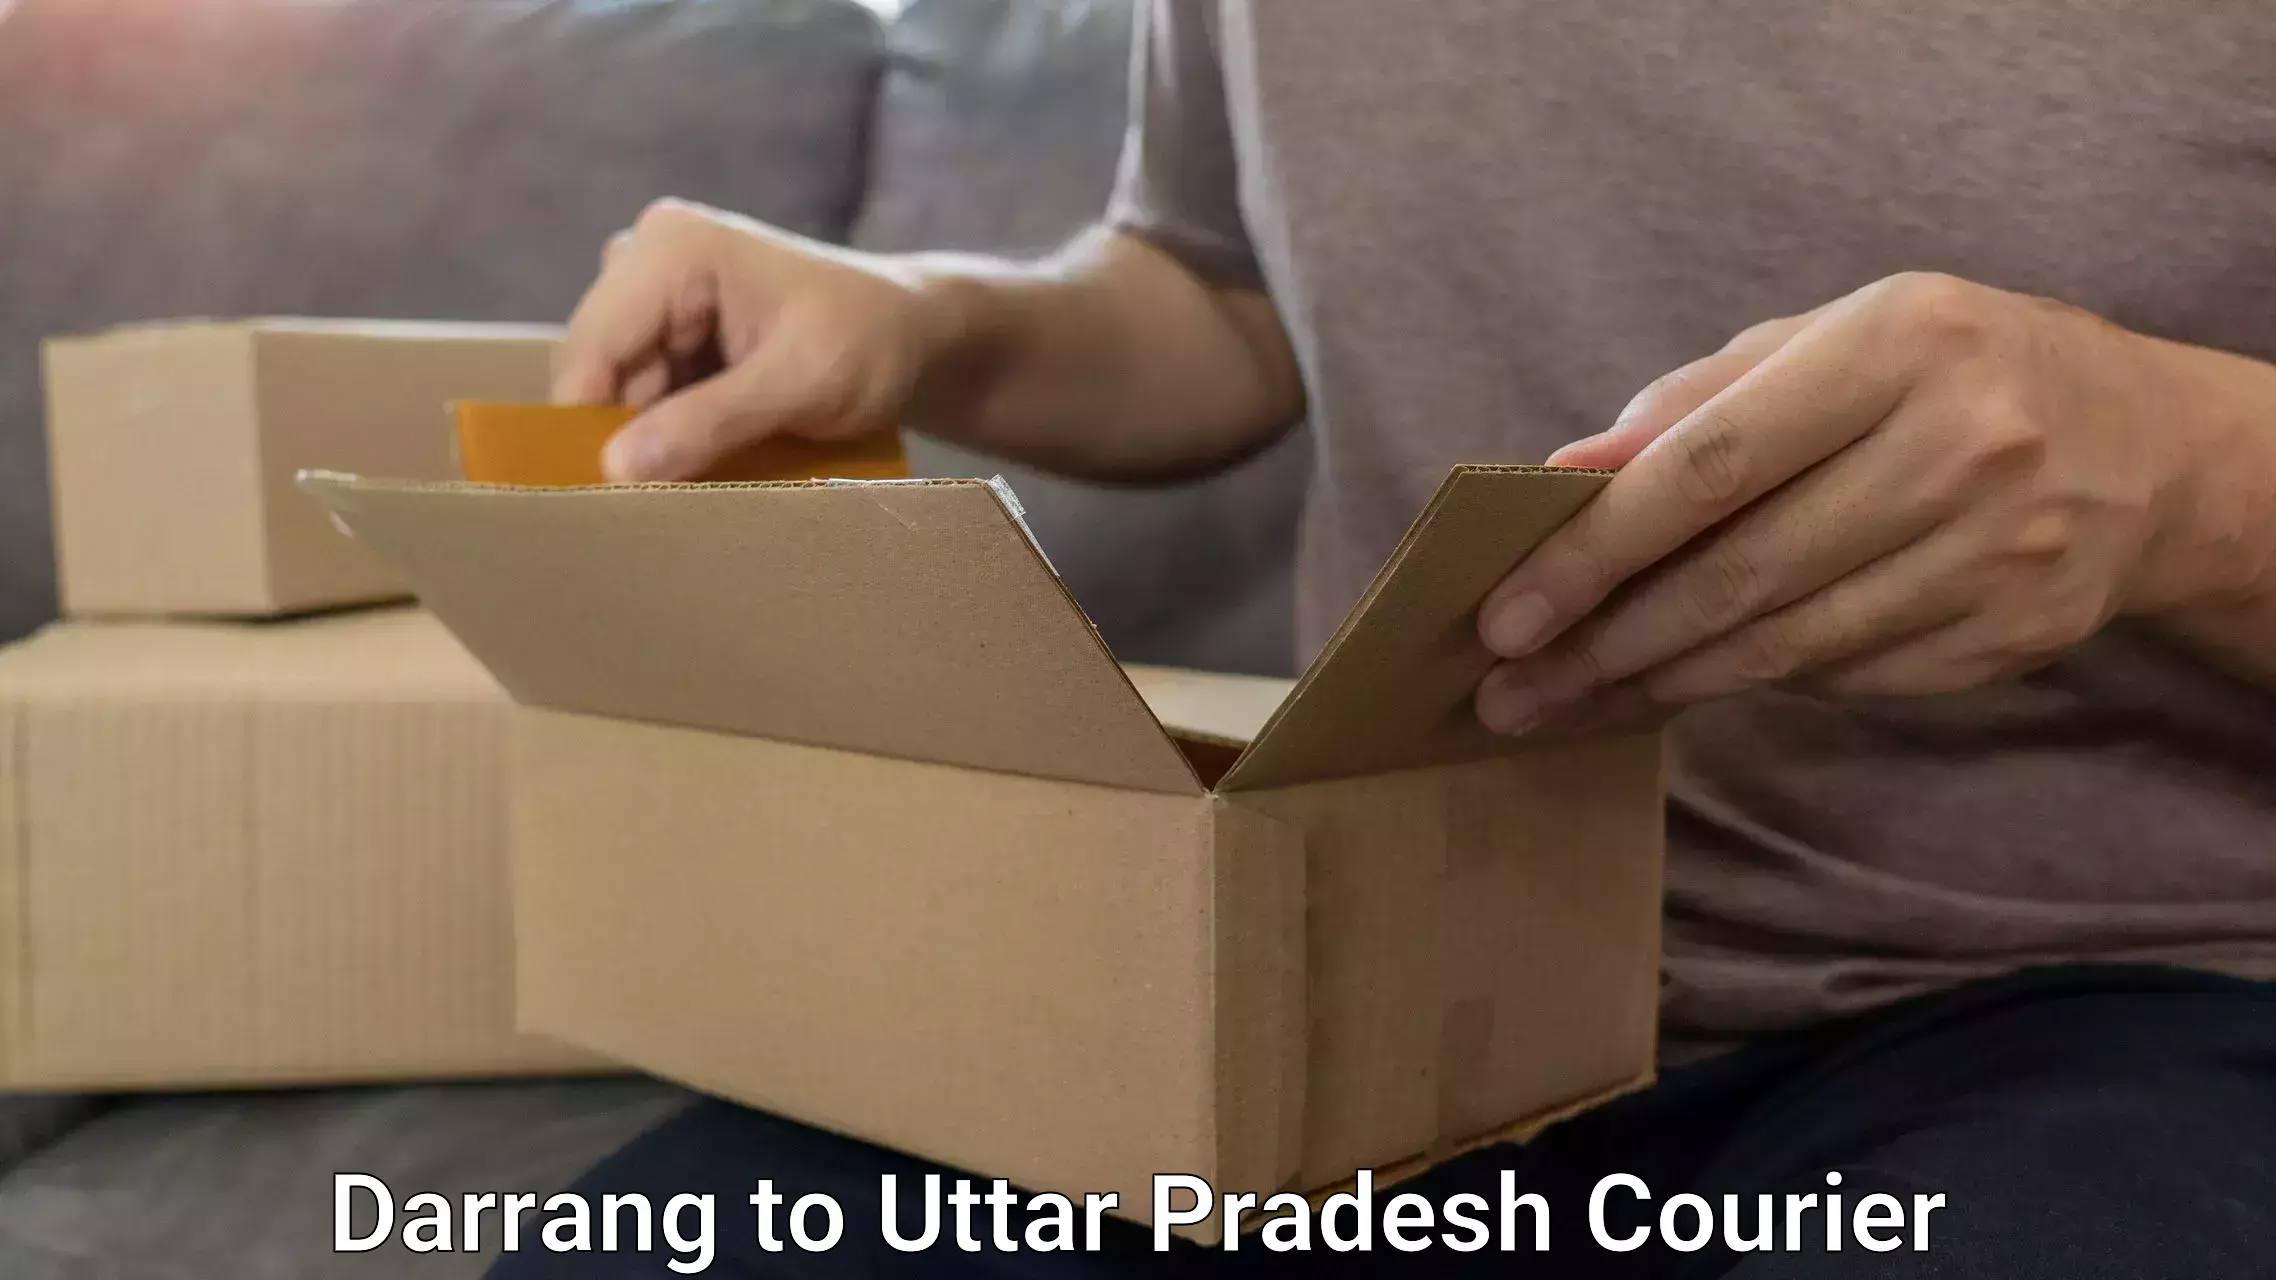 Hassle-free luggage shipping Darrang to Fatehpur